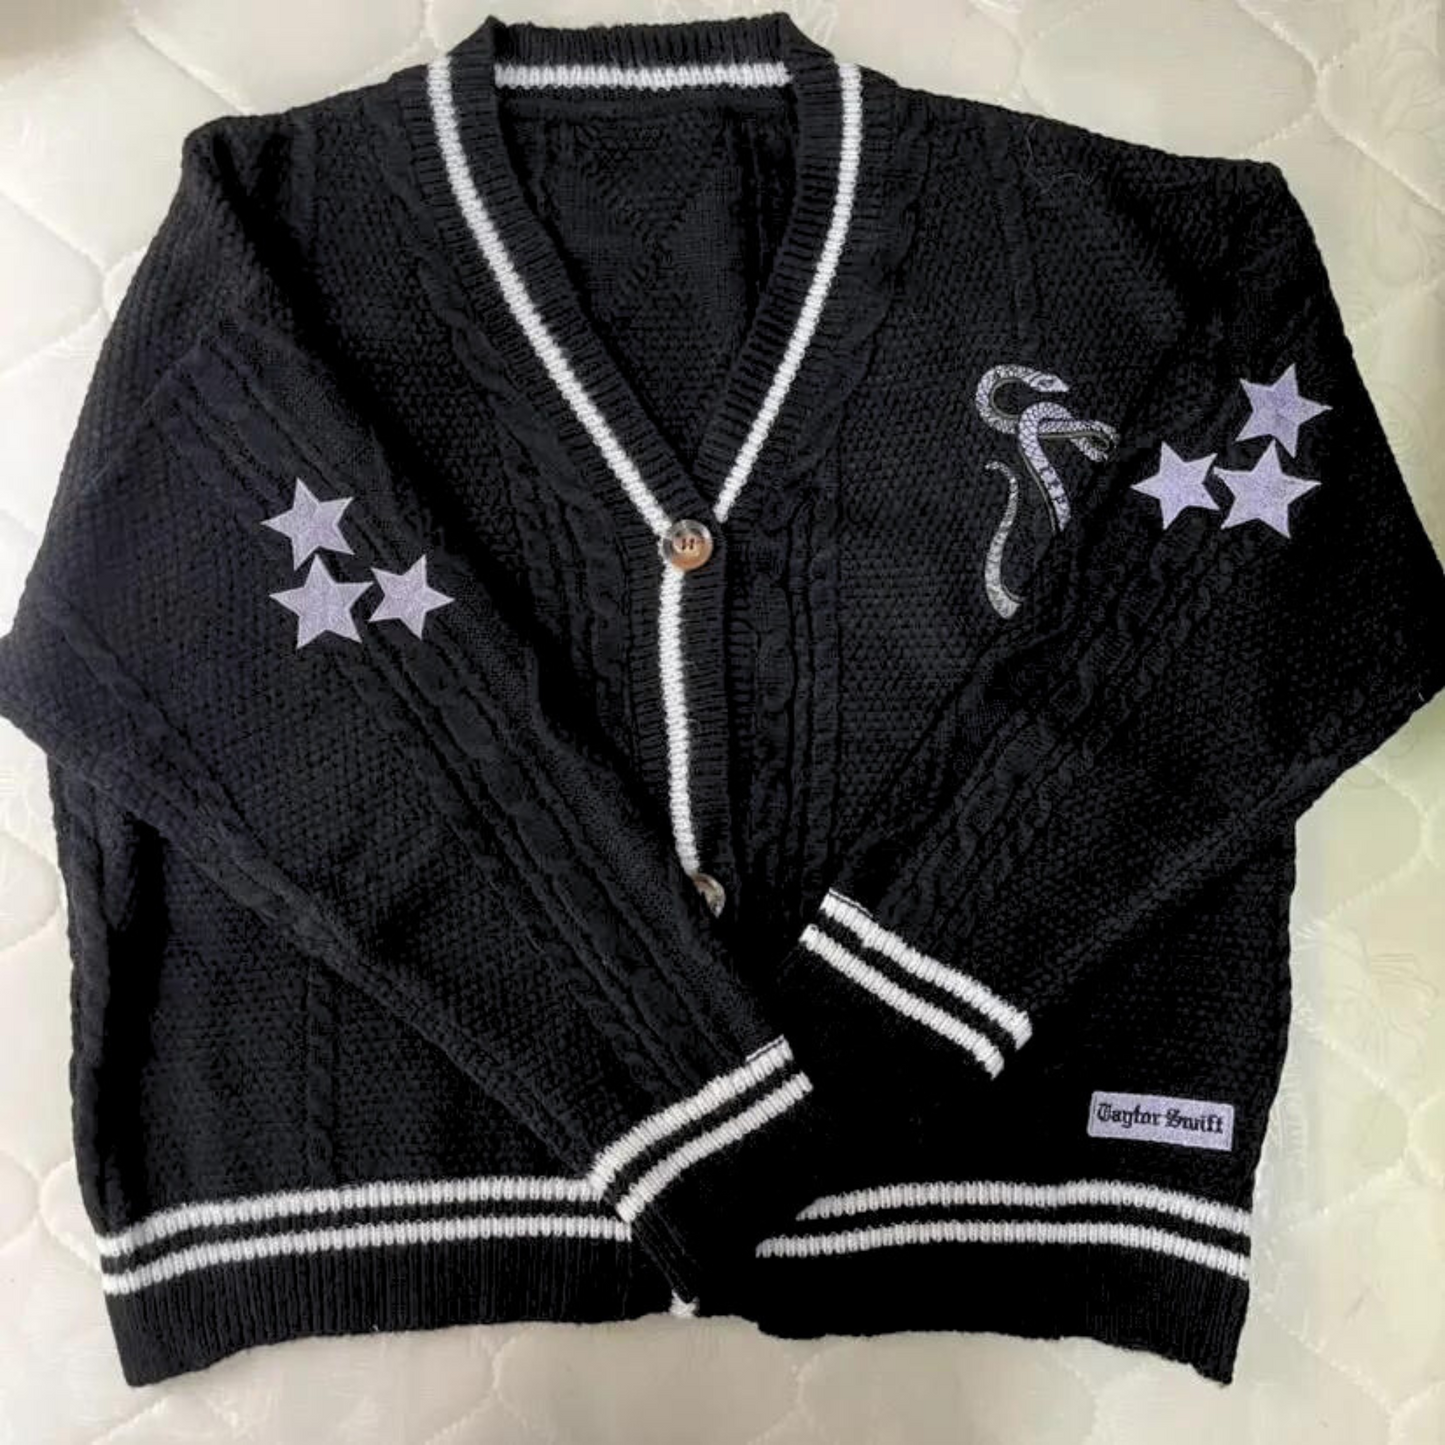 black reputation cardigan featuring the embroidered snake and stars